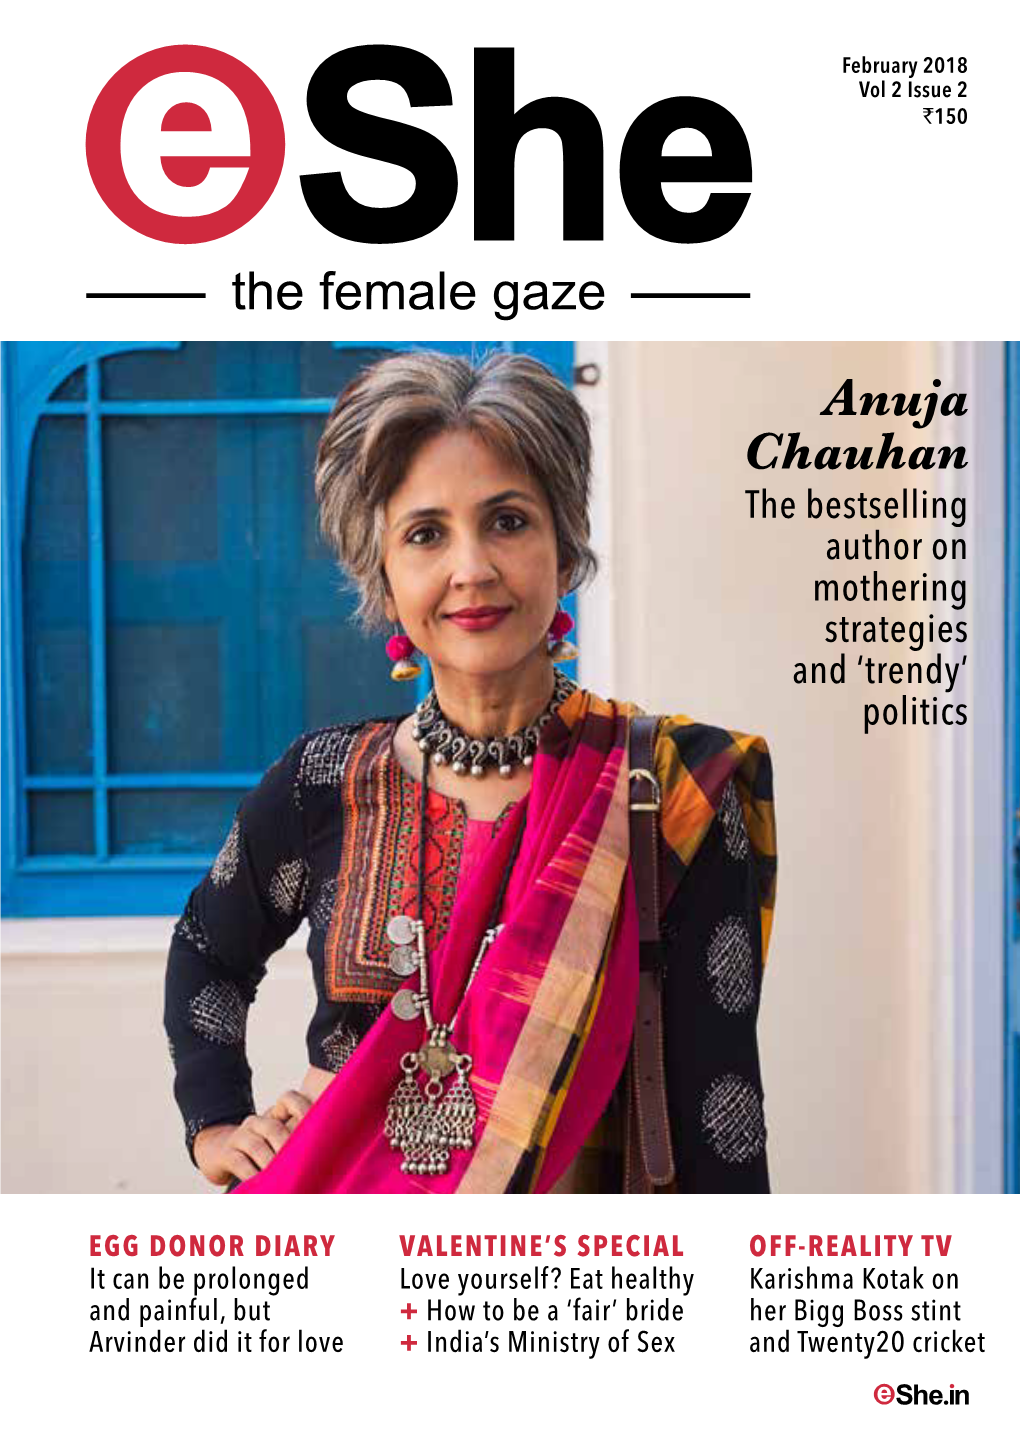 Anuja Chauhan the Bestselling Author on Mothering Strategies and ‘Trendy’ Politics